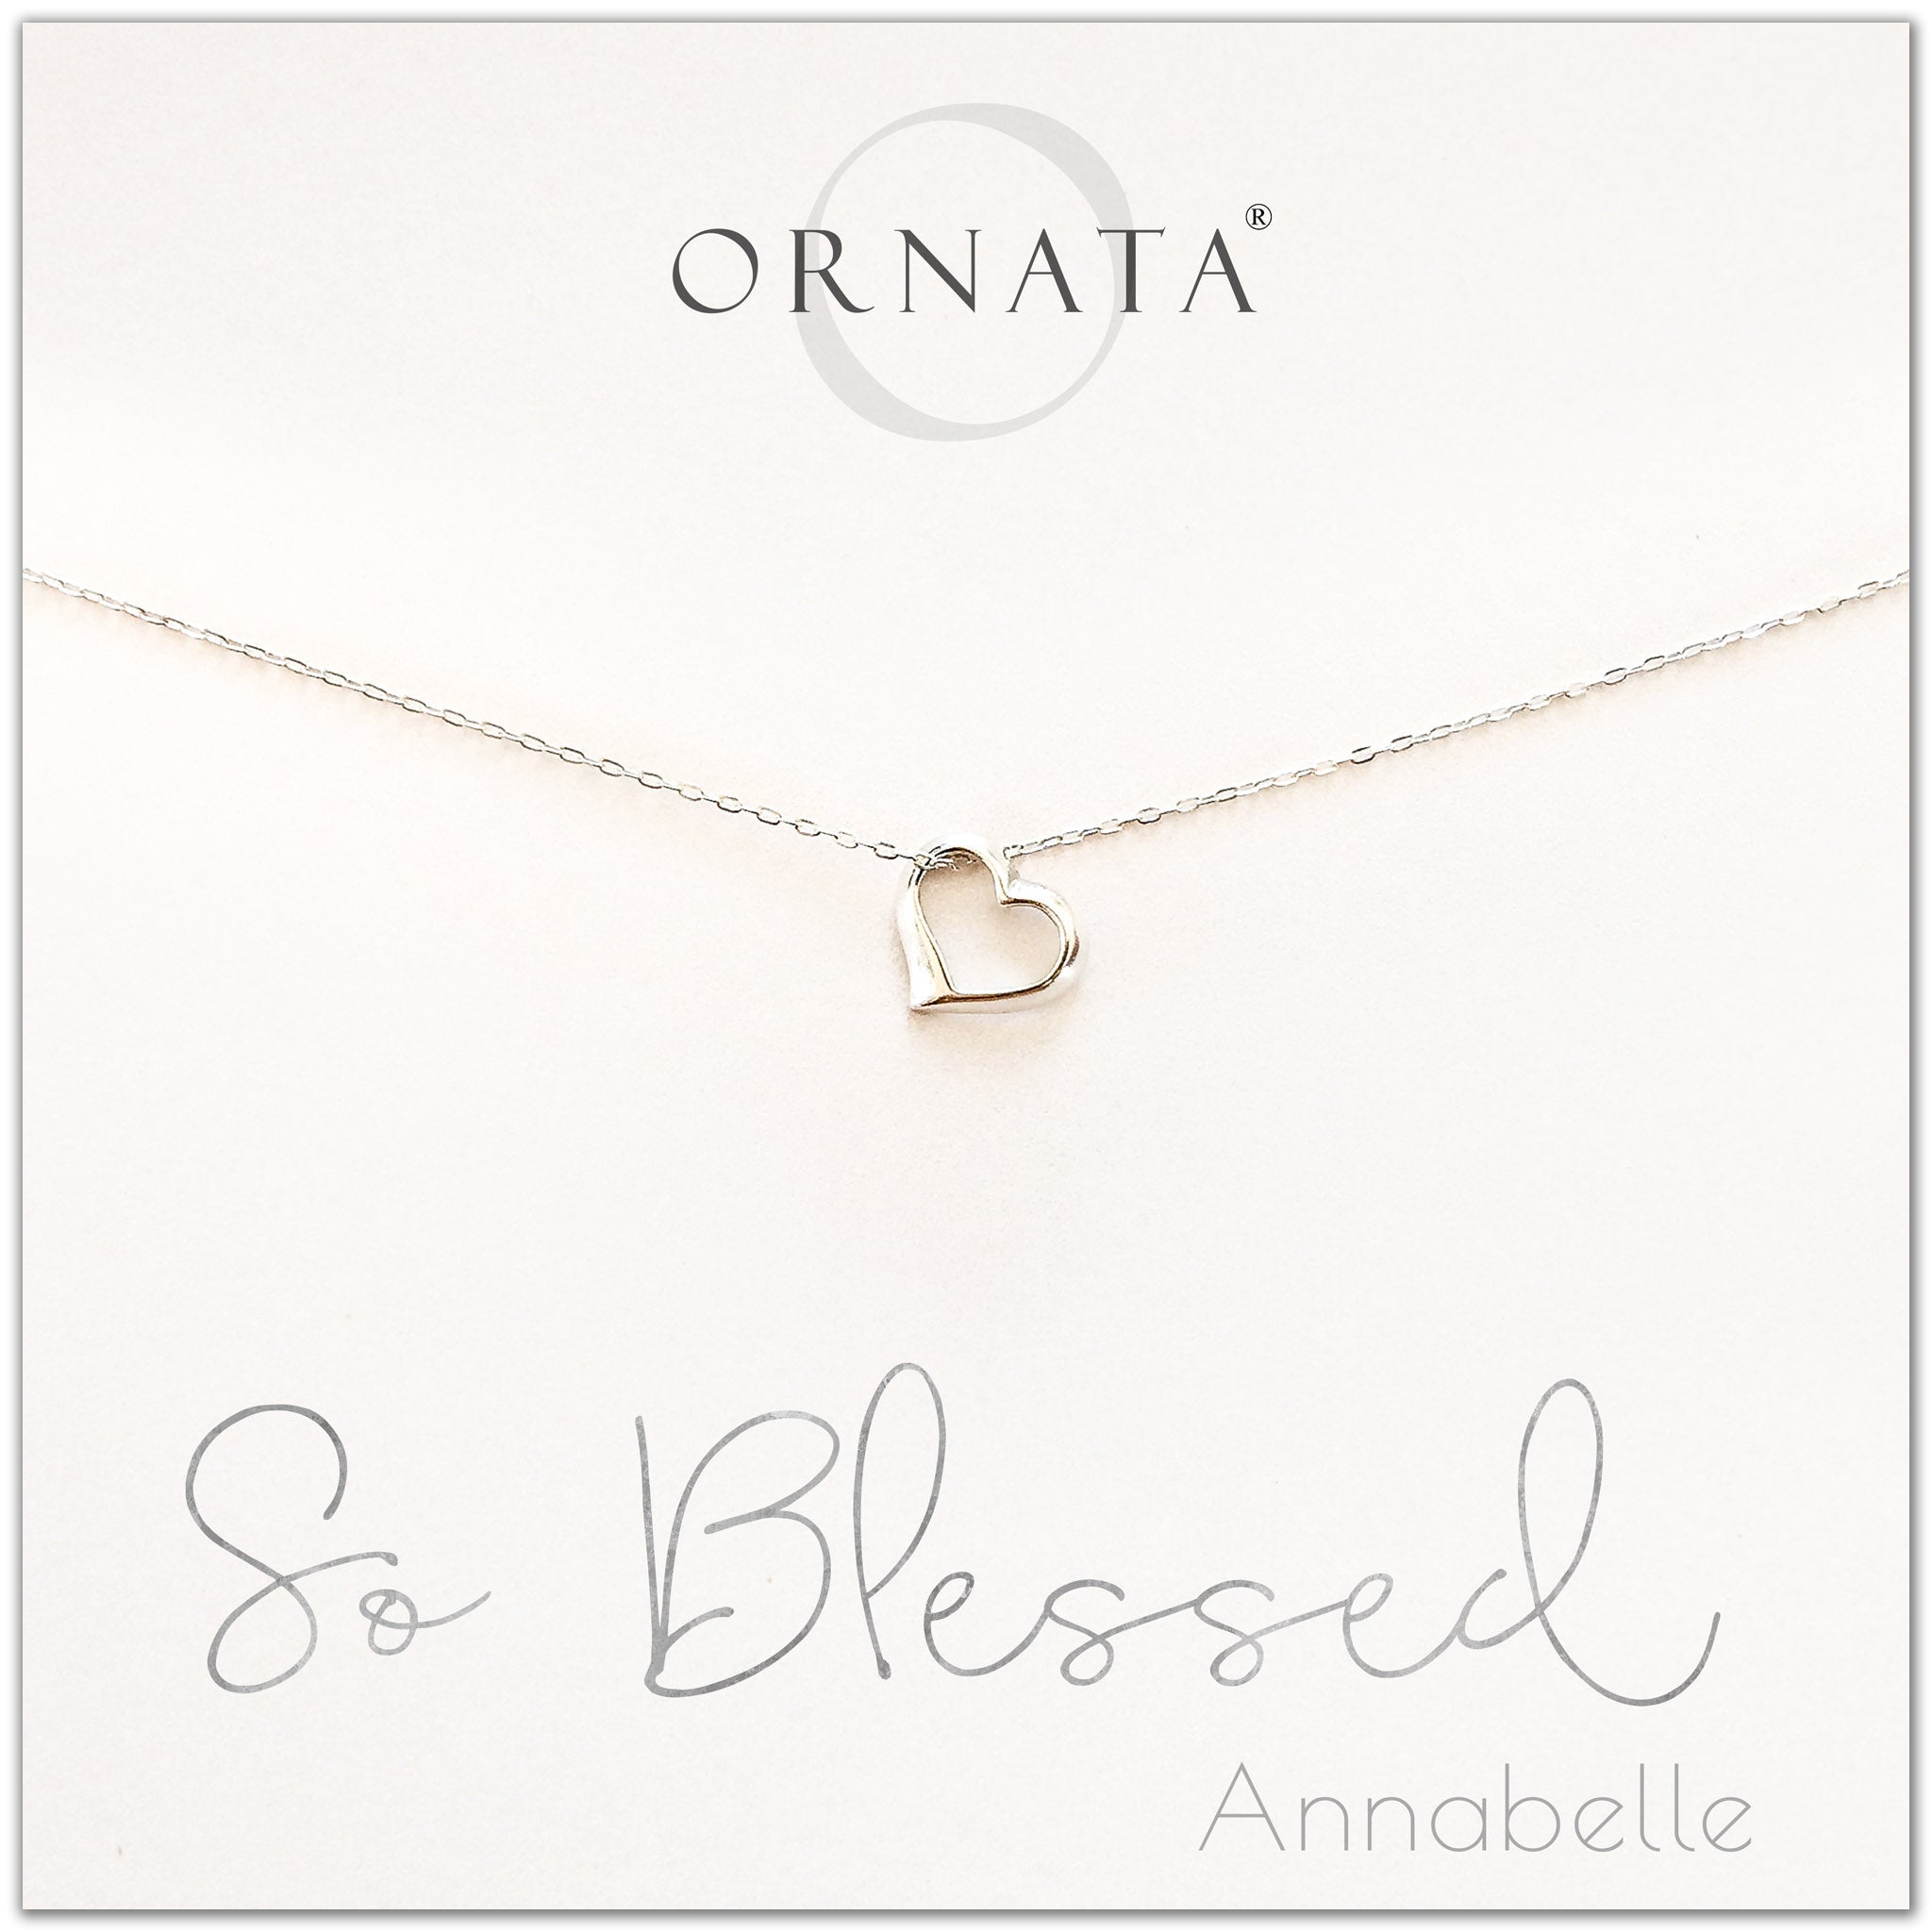 So blessed necklace - personalized silver heart necklace. Our sterling silver custom jewelry is a perfect gift for girlfriends, wives, mothers, nieces, daughters, best friends, sisters, significant others, newlyweds, and soul mates - symbolic heart necklace.